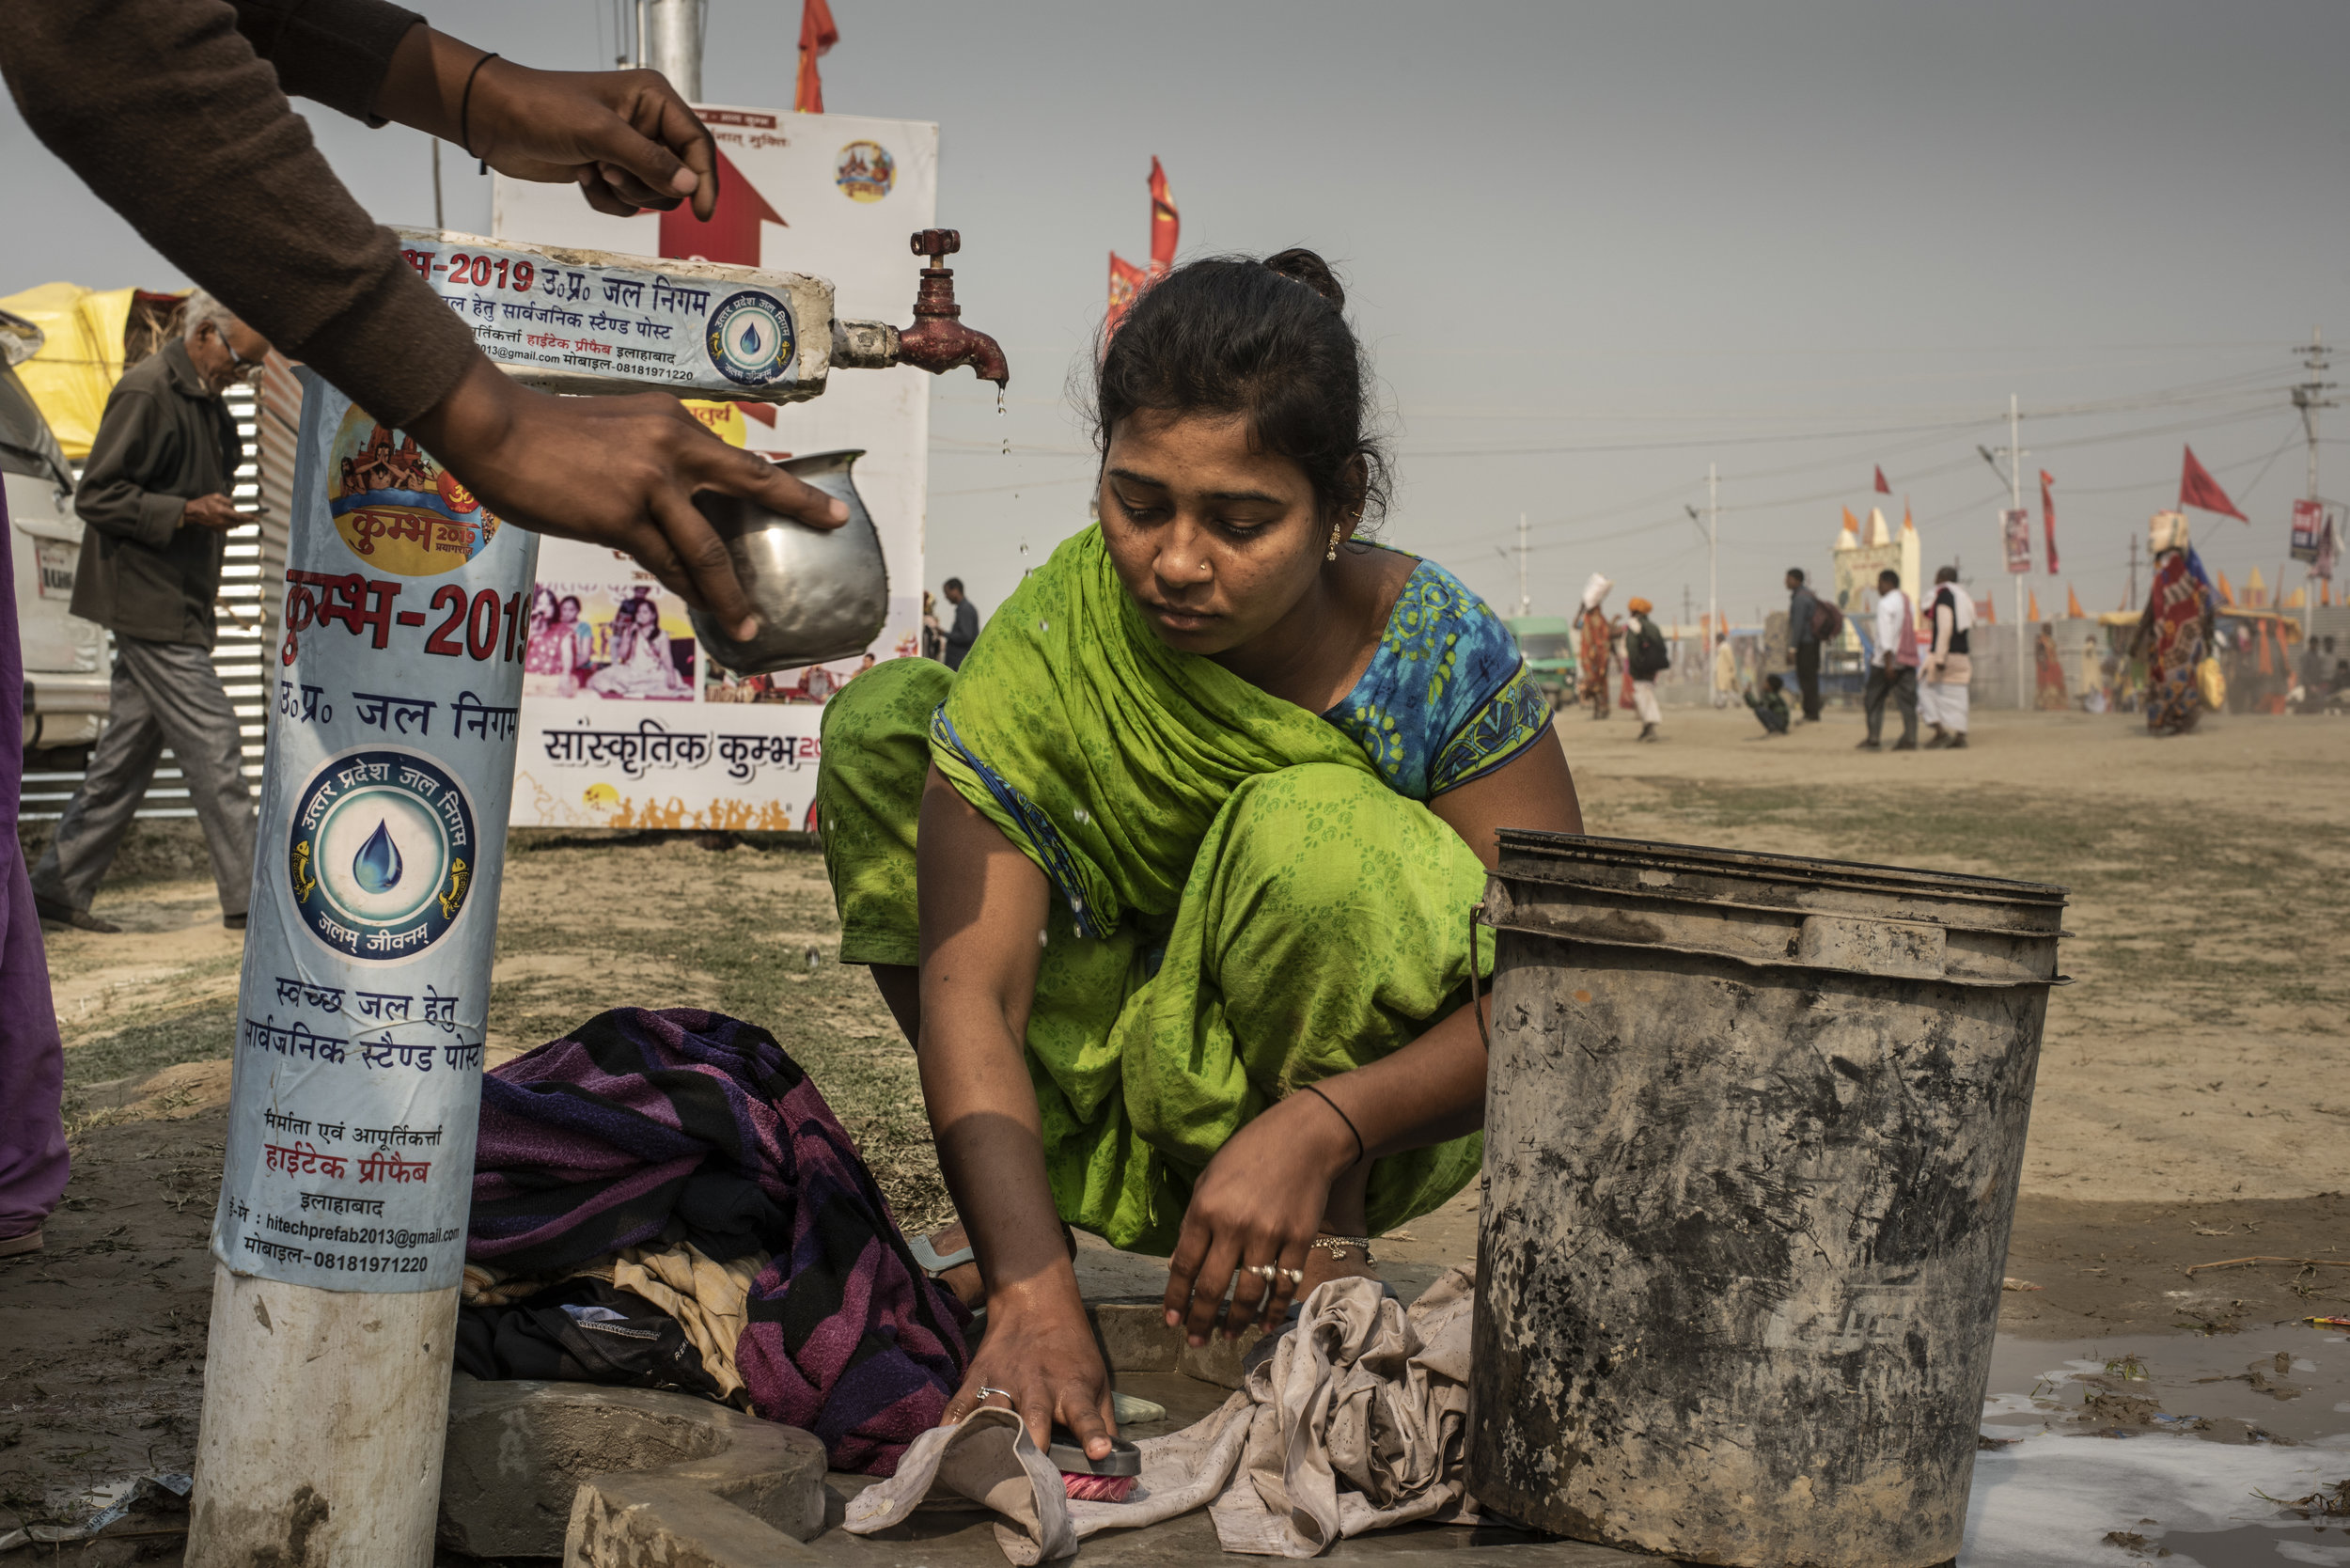  Woman cleans clothes at the roadside faucet. 